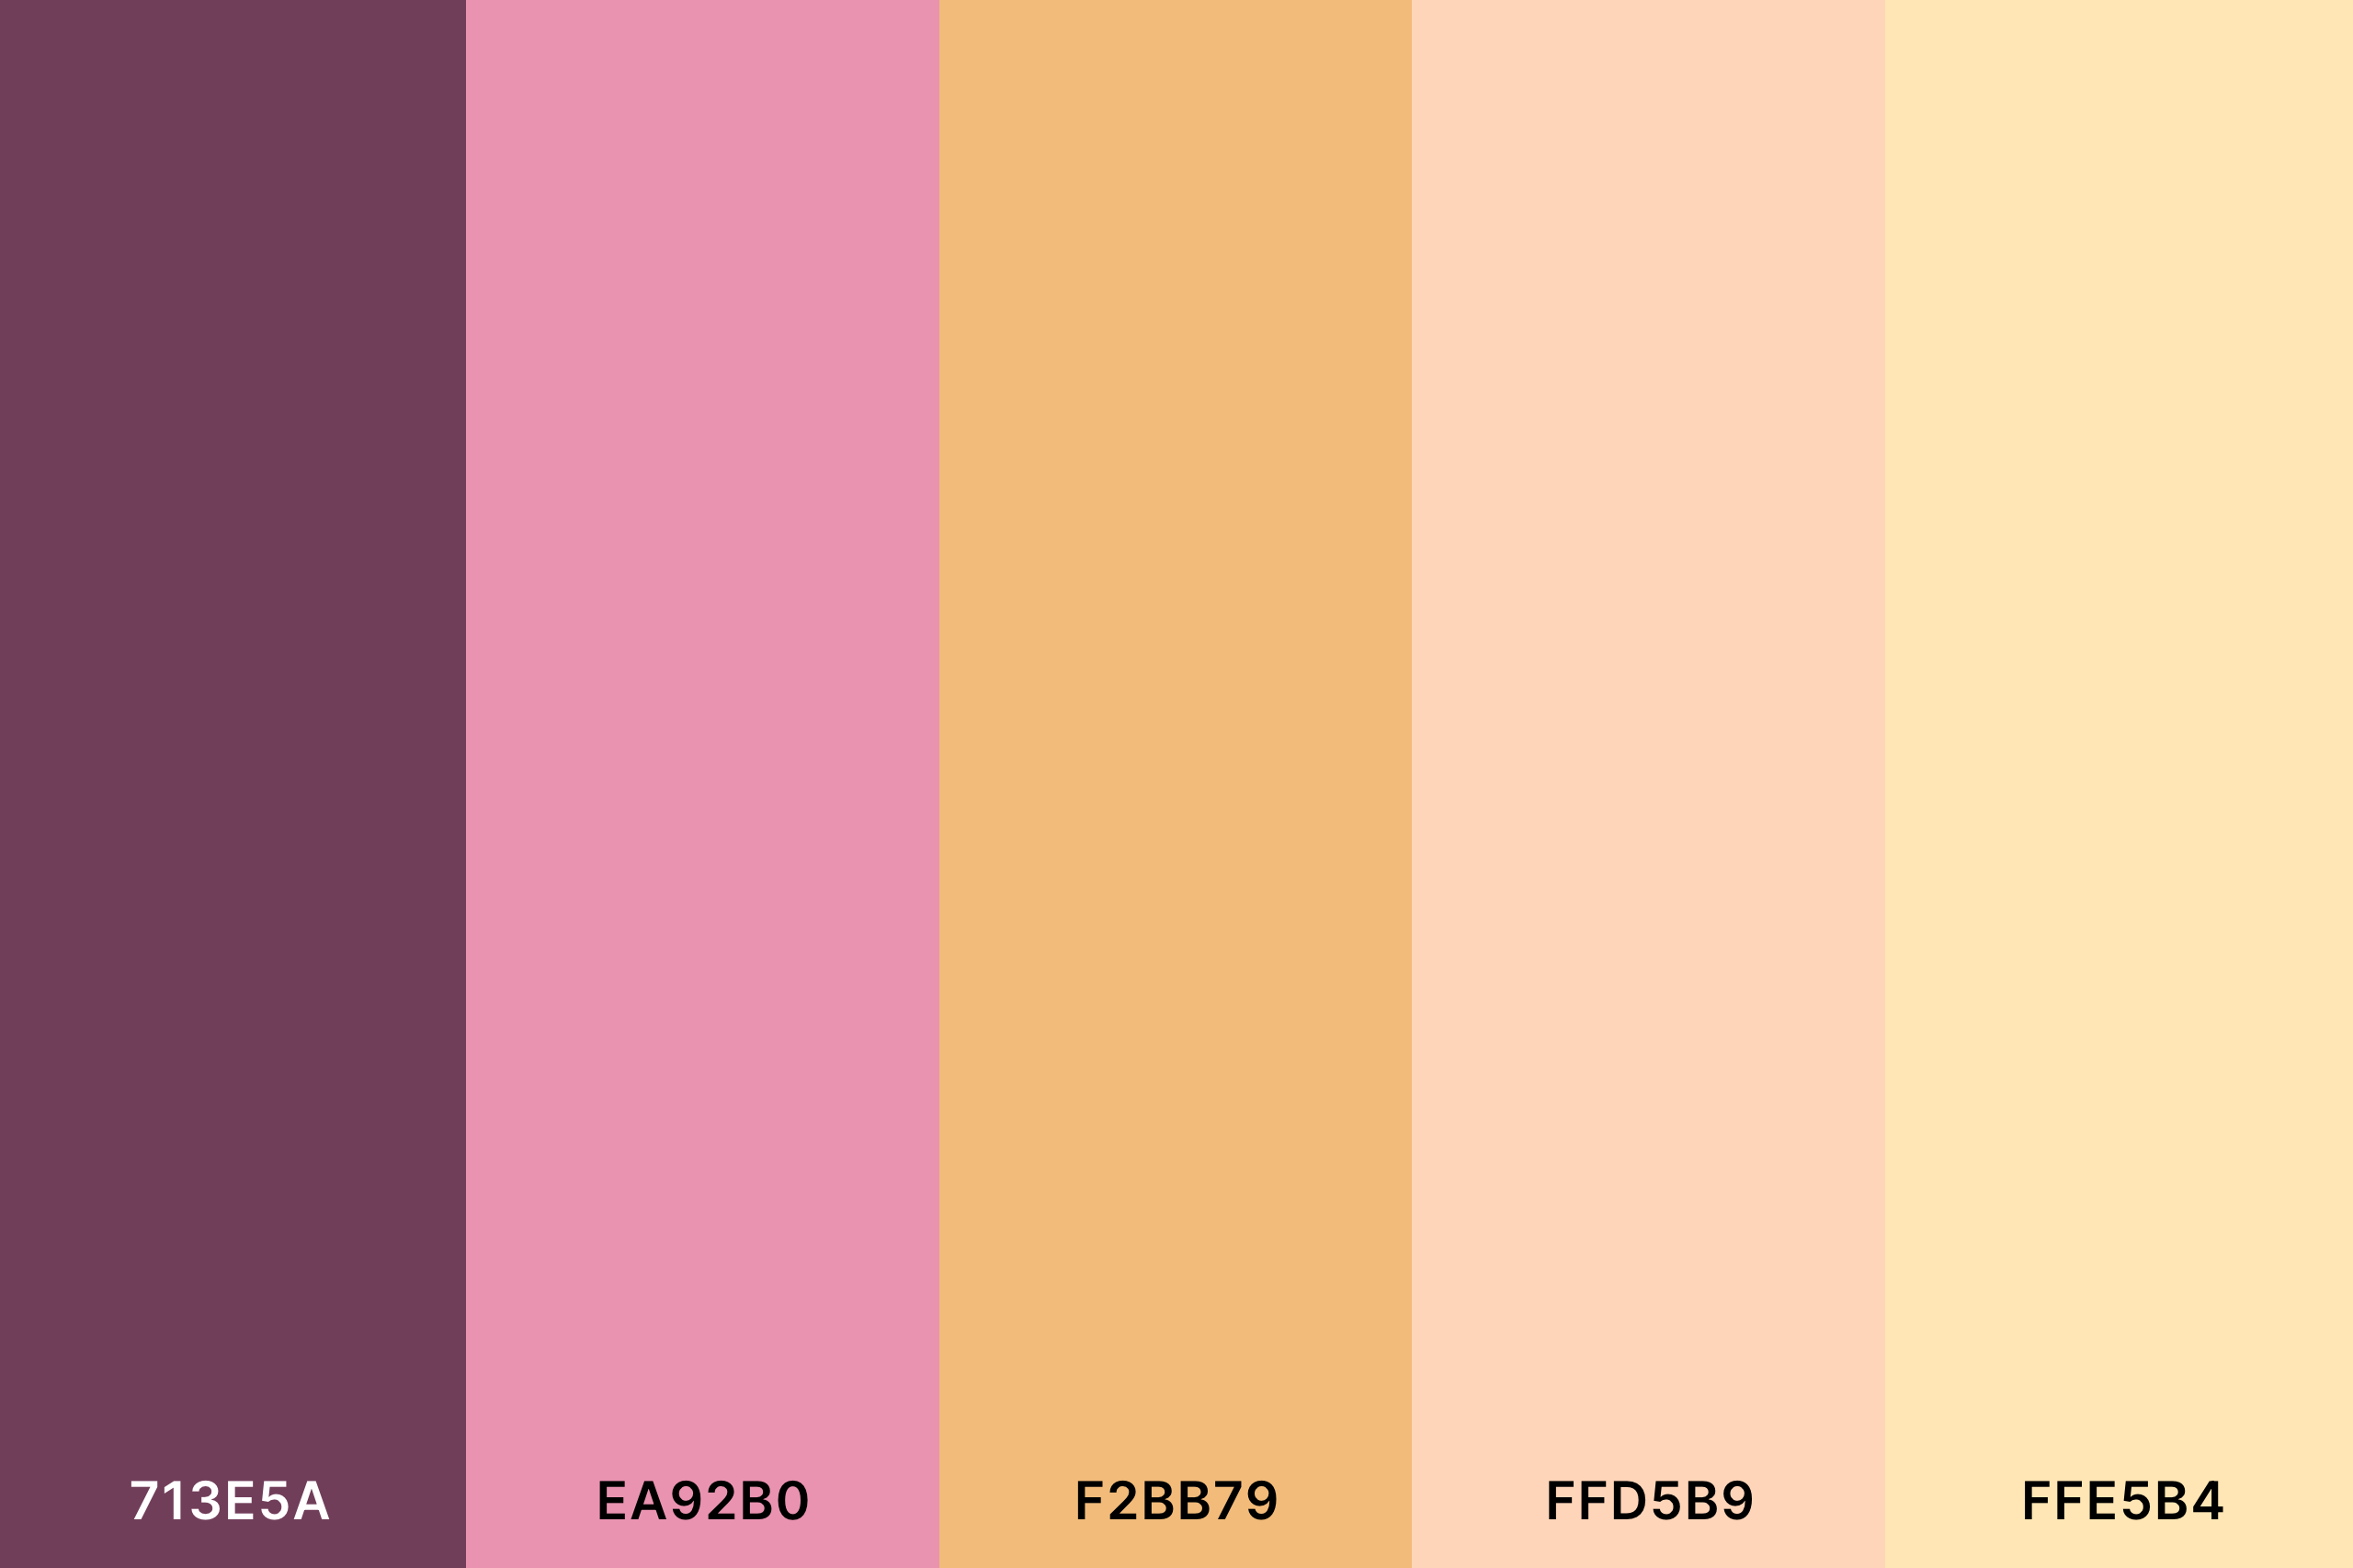 Peach Pink Color Palette with Eggplant (Hex #713E5A) + Amaranth Pink (Hex #EA92B0) + Fawn (Hex #F2BB79) + Apricot (Hex #FFD5B9) + Peach (Hex #FFE5B4) Color Palette with Hex Codes